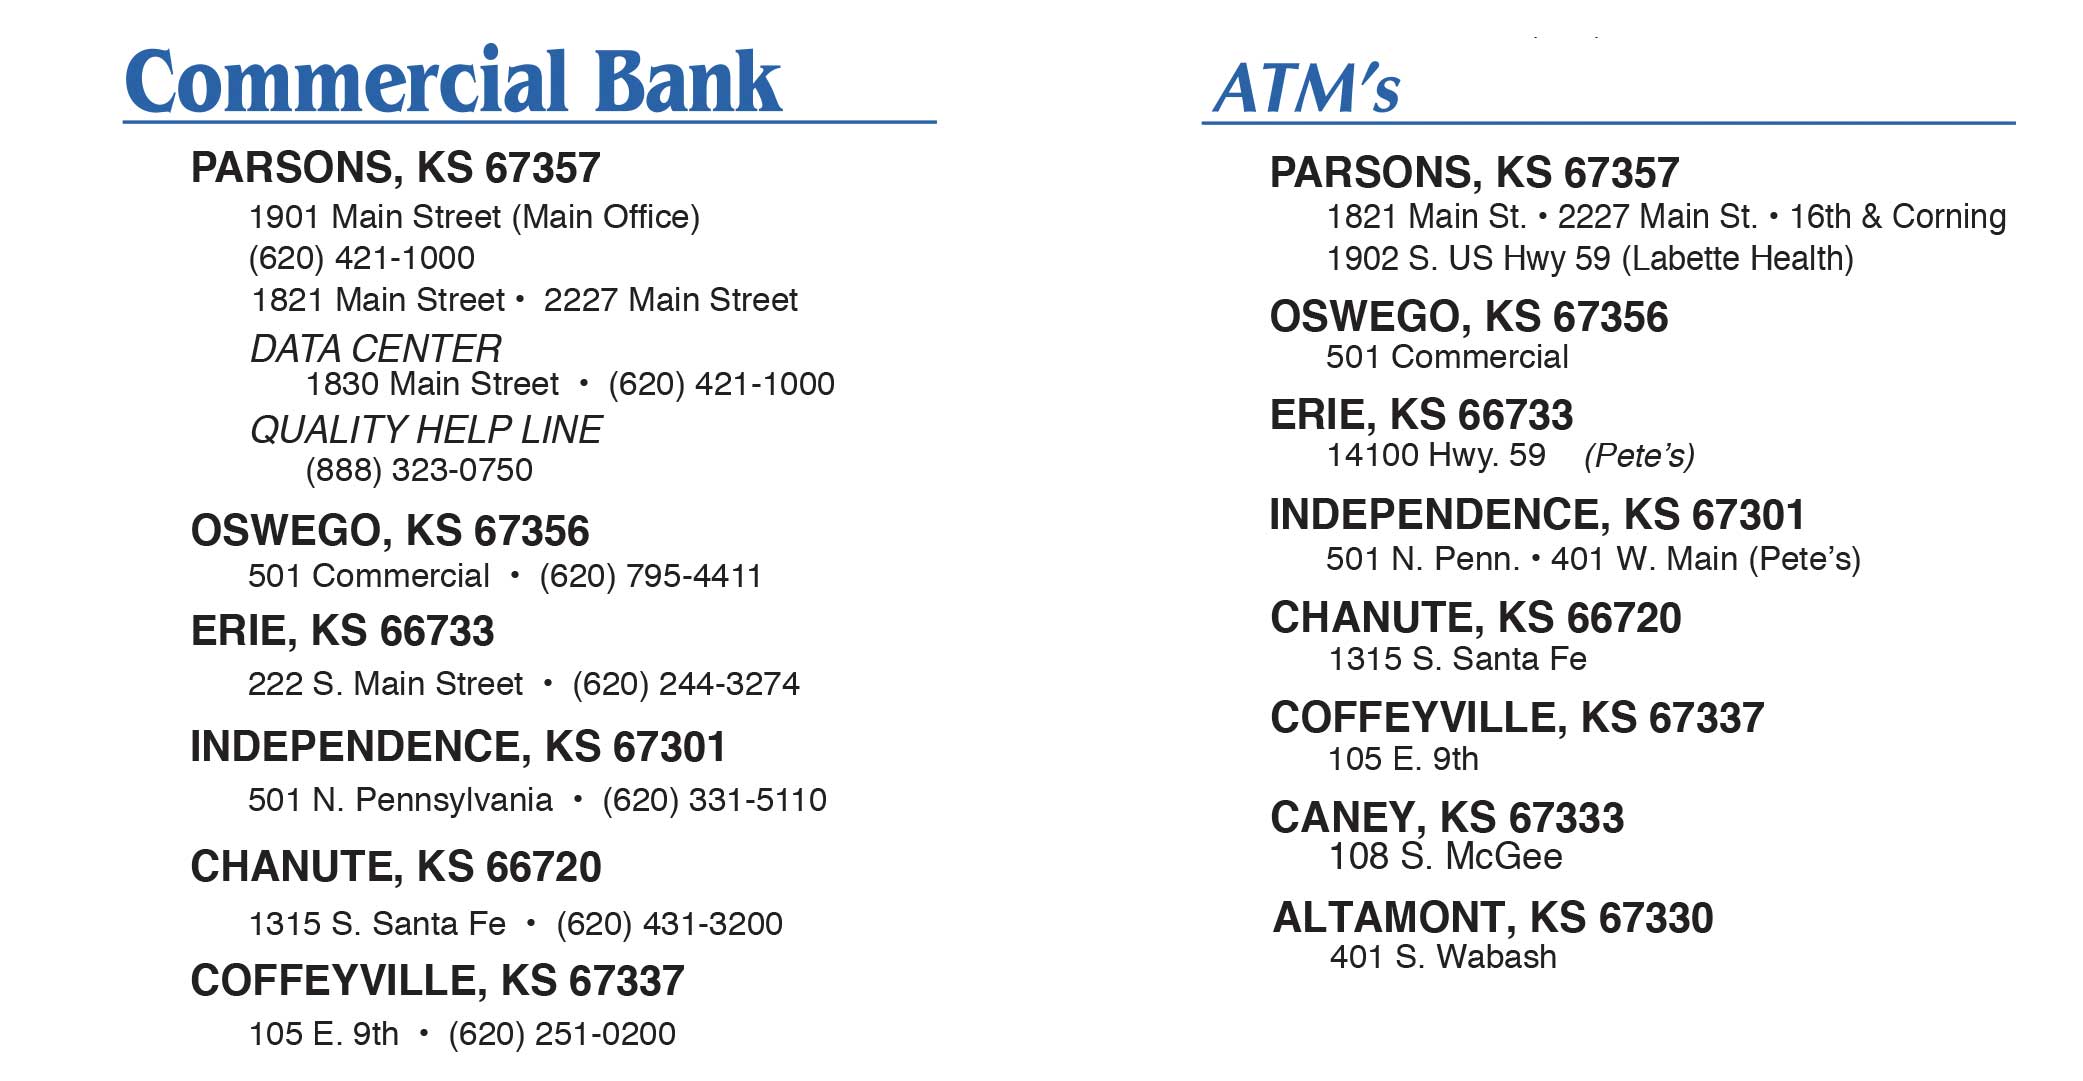 This contains a list of Commercial Bank physical and ATM locations